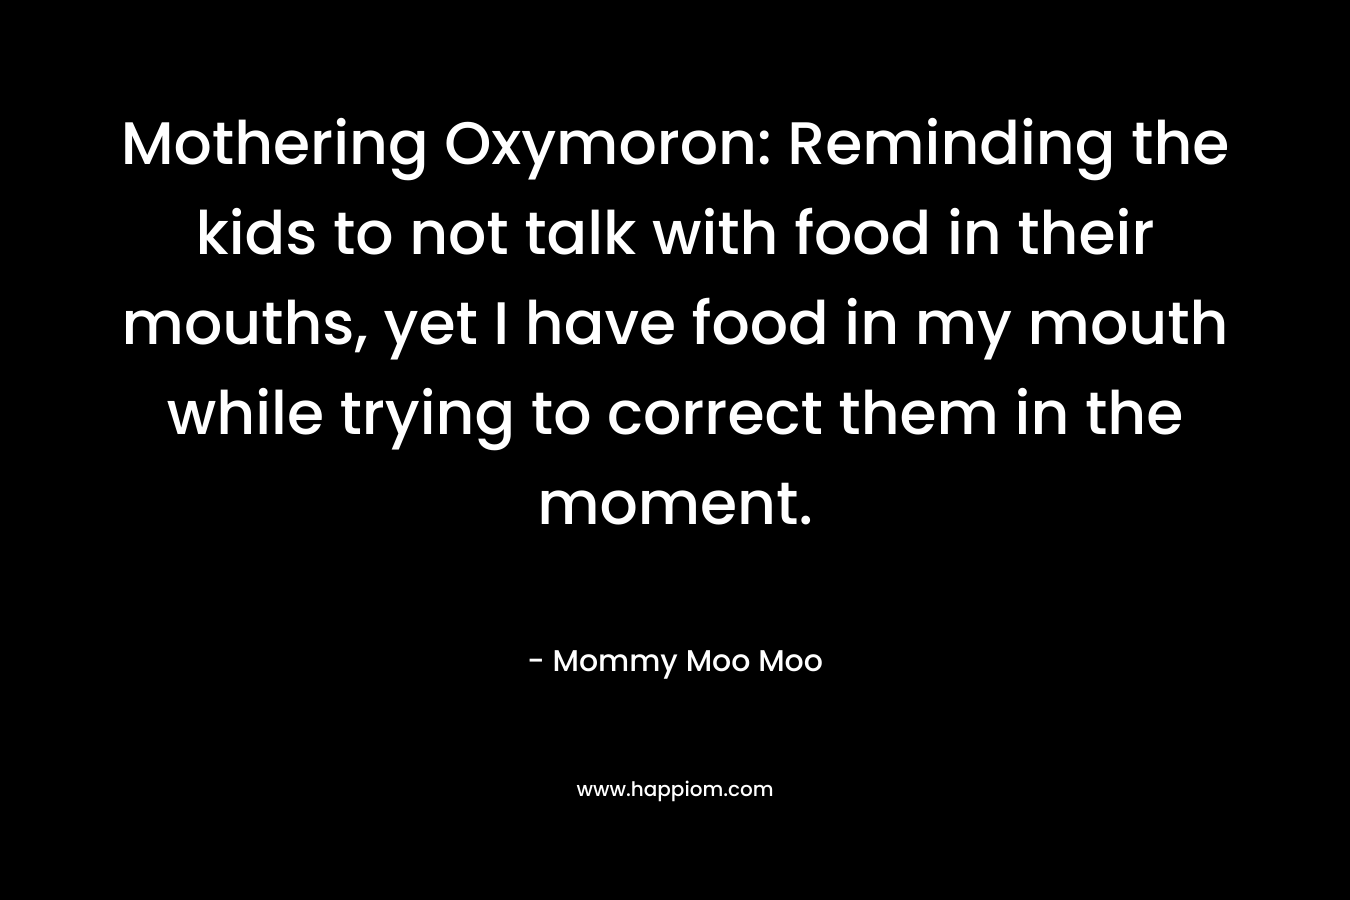 Mothering Oxymoron: Reminding the kids to not talk with food in their mouths, yet I have food in my mouth while trying to correct them in the moment.